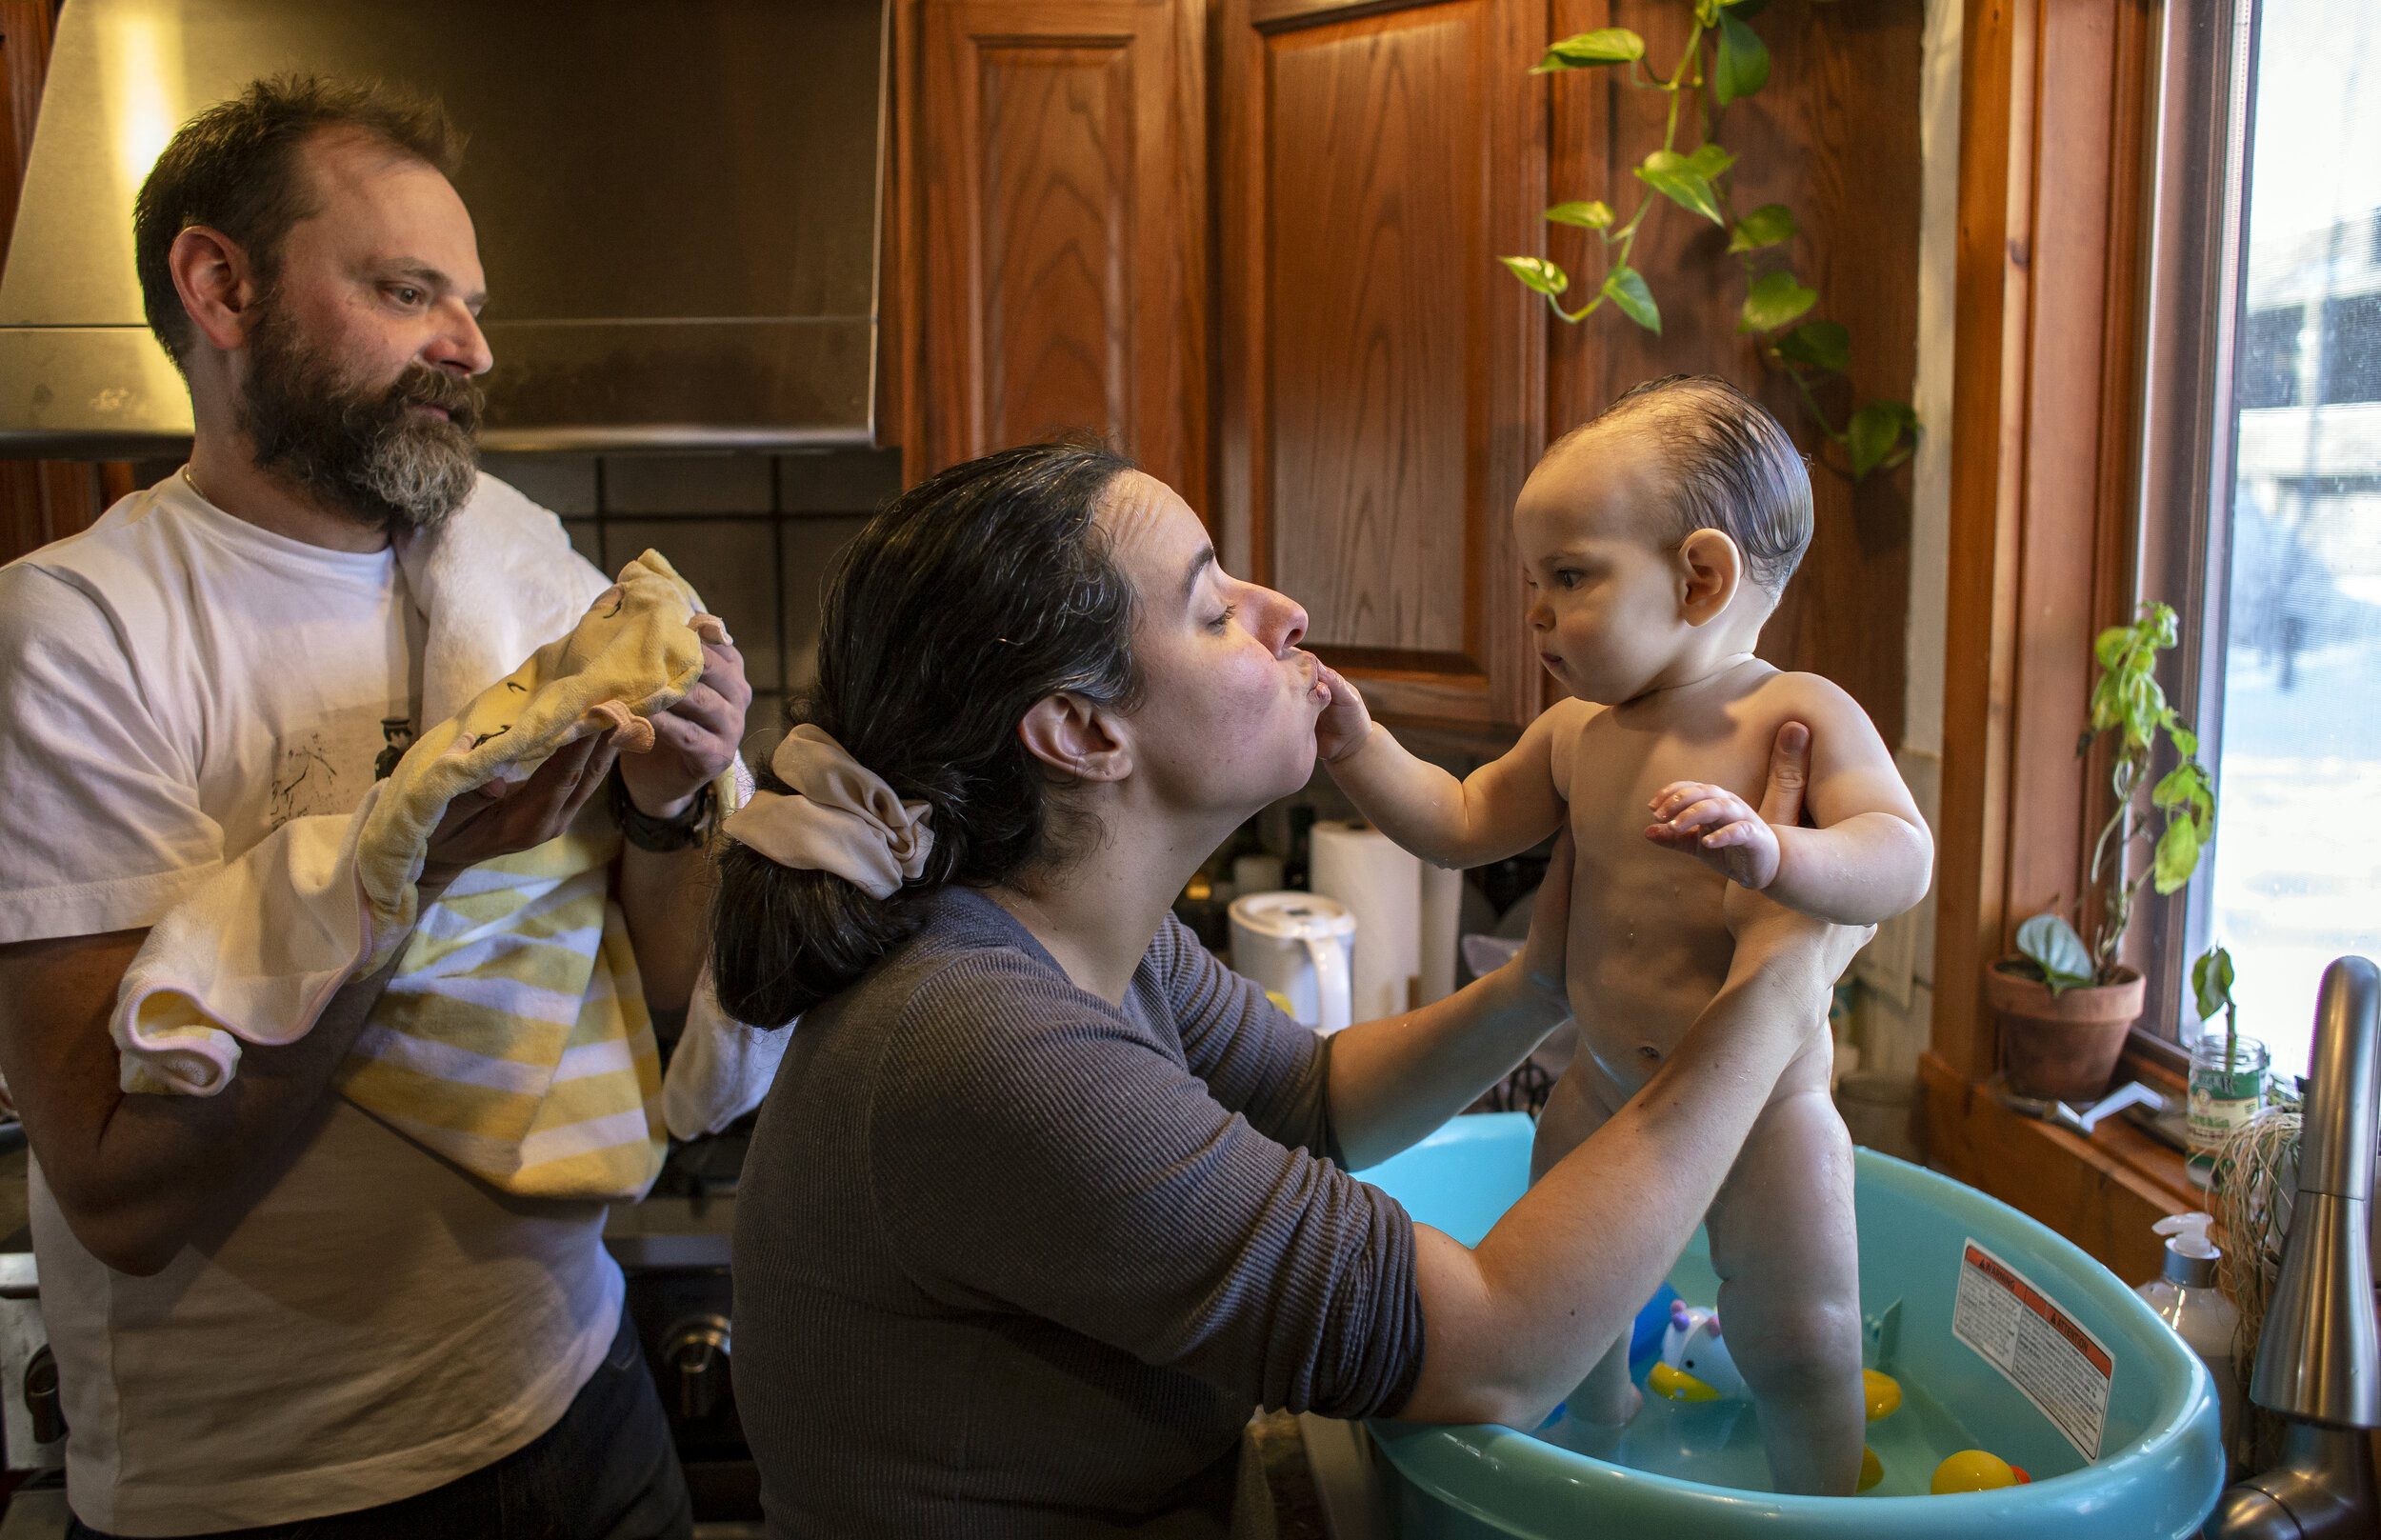  Souza kisses Isadora’s fingers as she and Metcalf prepare to take her out of the bath on Jan. 1, 2021. Playing in the water during bath time is one of Isadora’s favorite activities.  